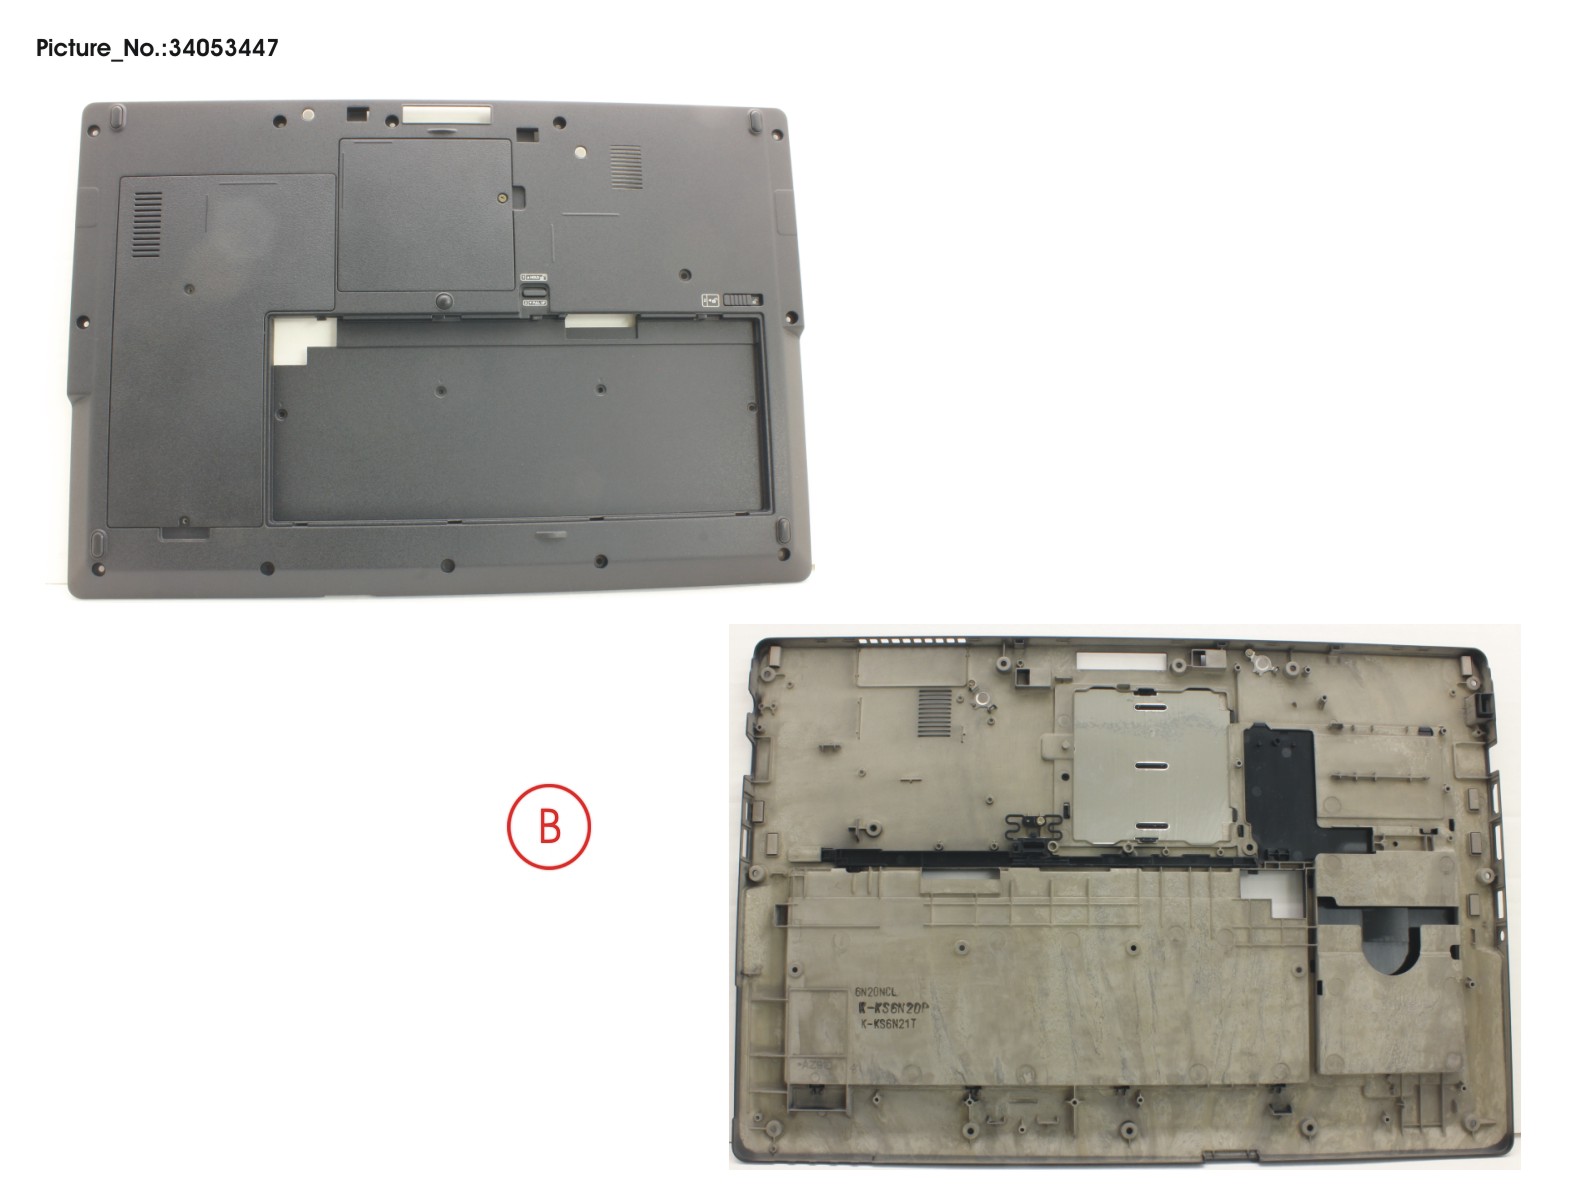 LOWER ASSY (FOR HDD)